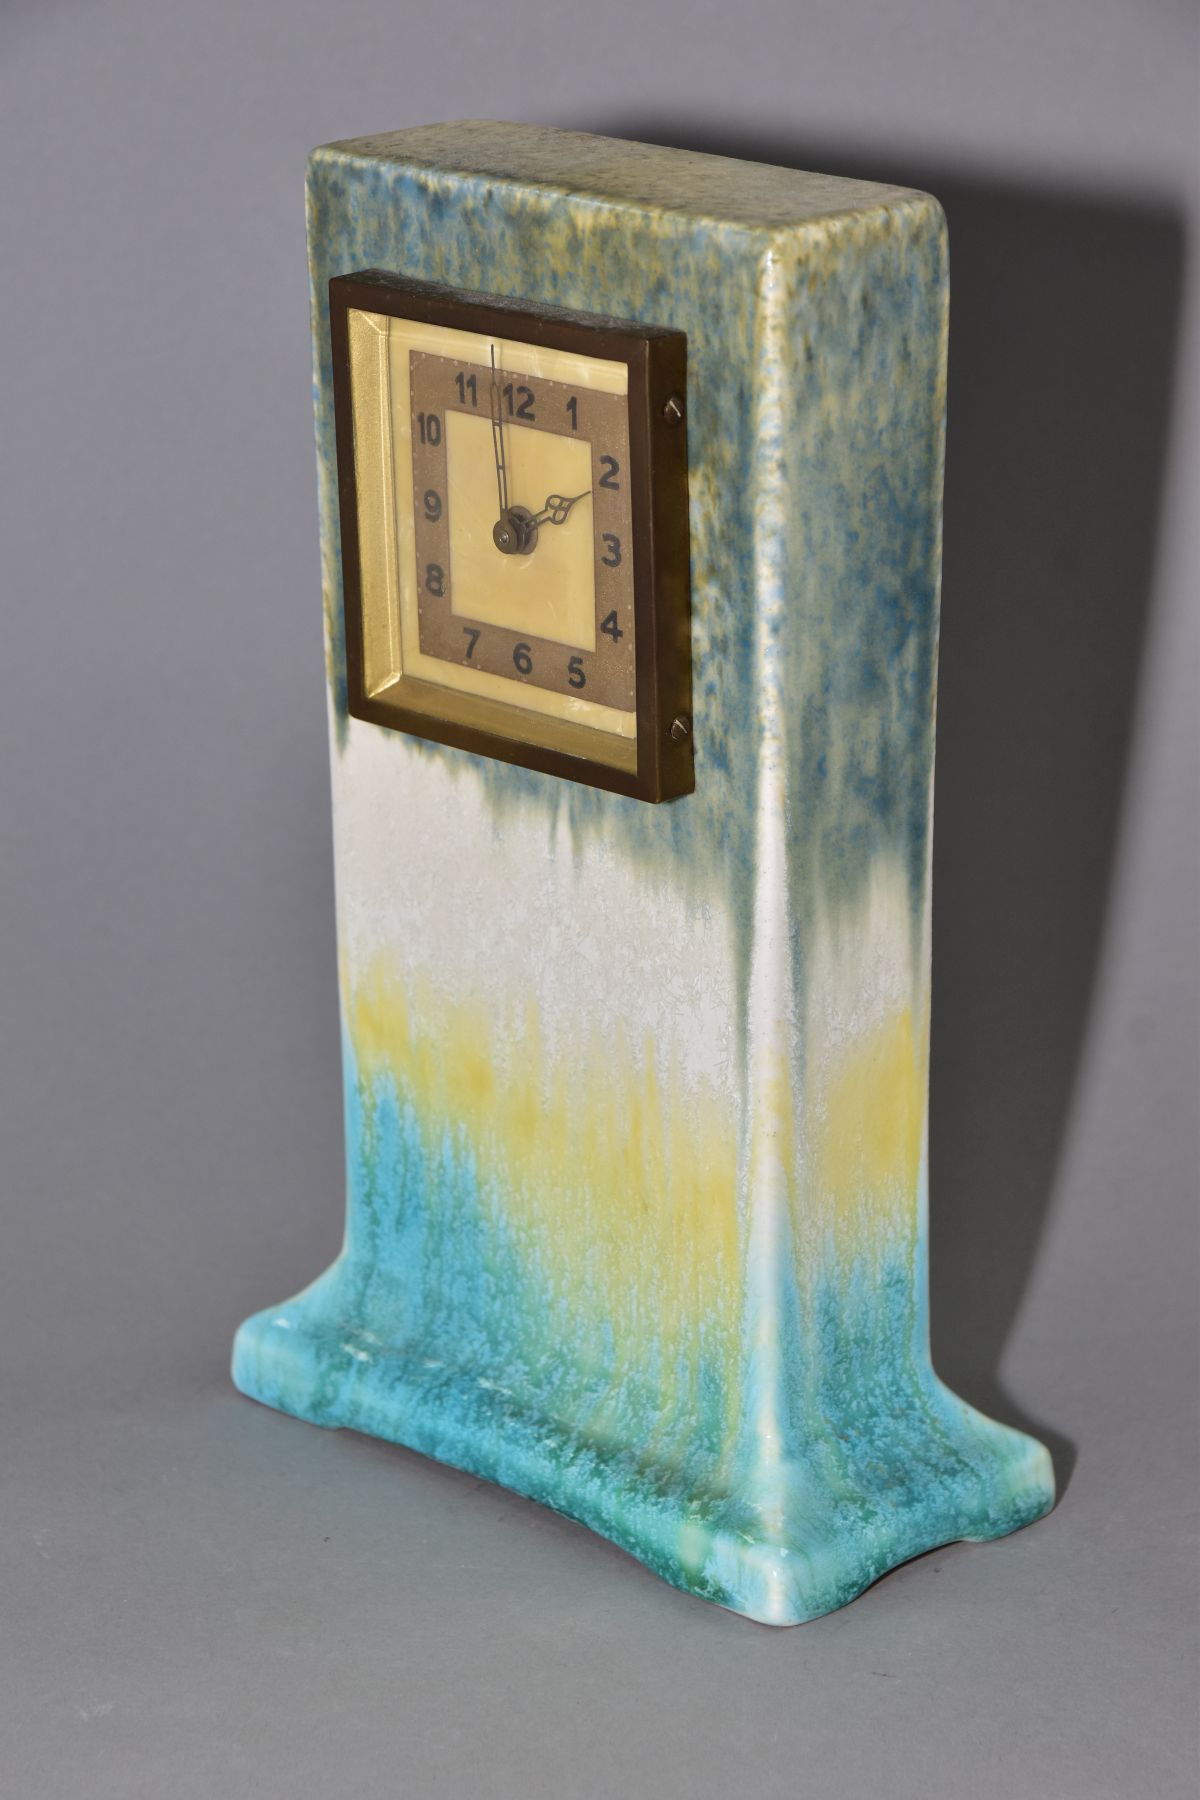 RUSKIN POTTERY, a rectangular clock case with flared base, matt green fading to white and yellow, - Image 2 of 5